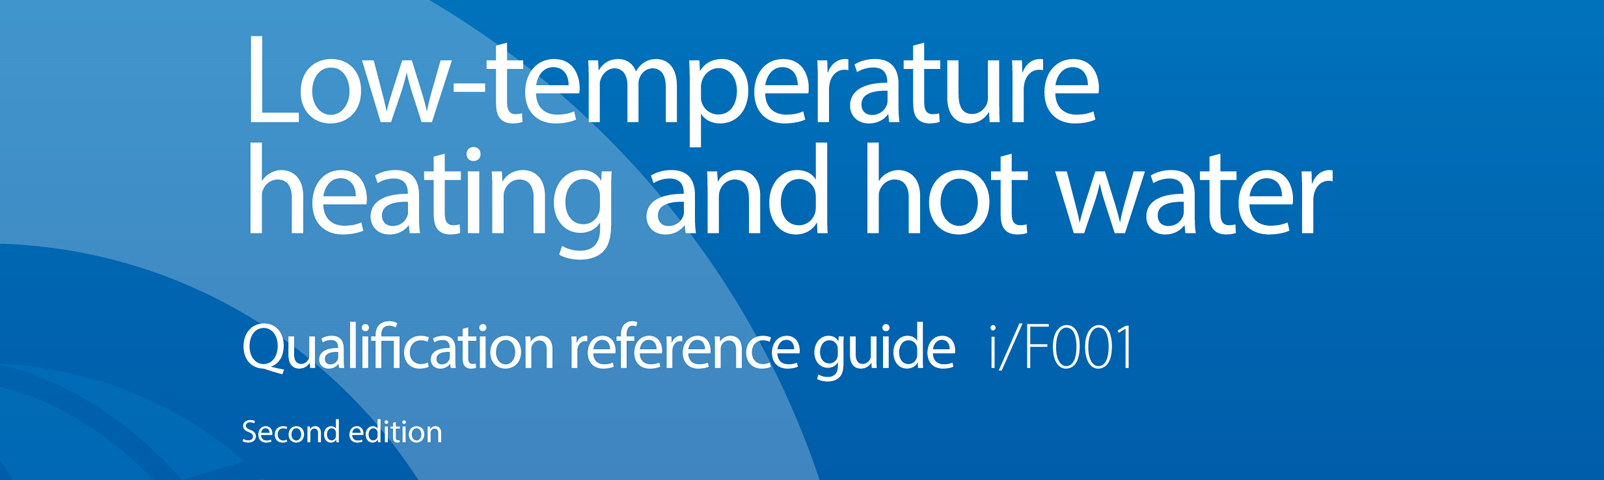 Low Temperature Heating and Hot Water insight guide